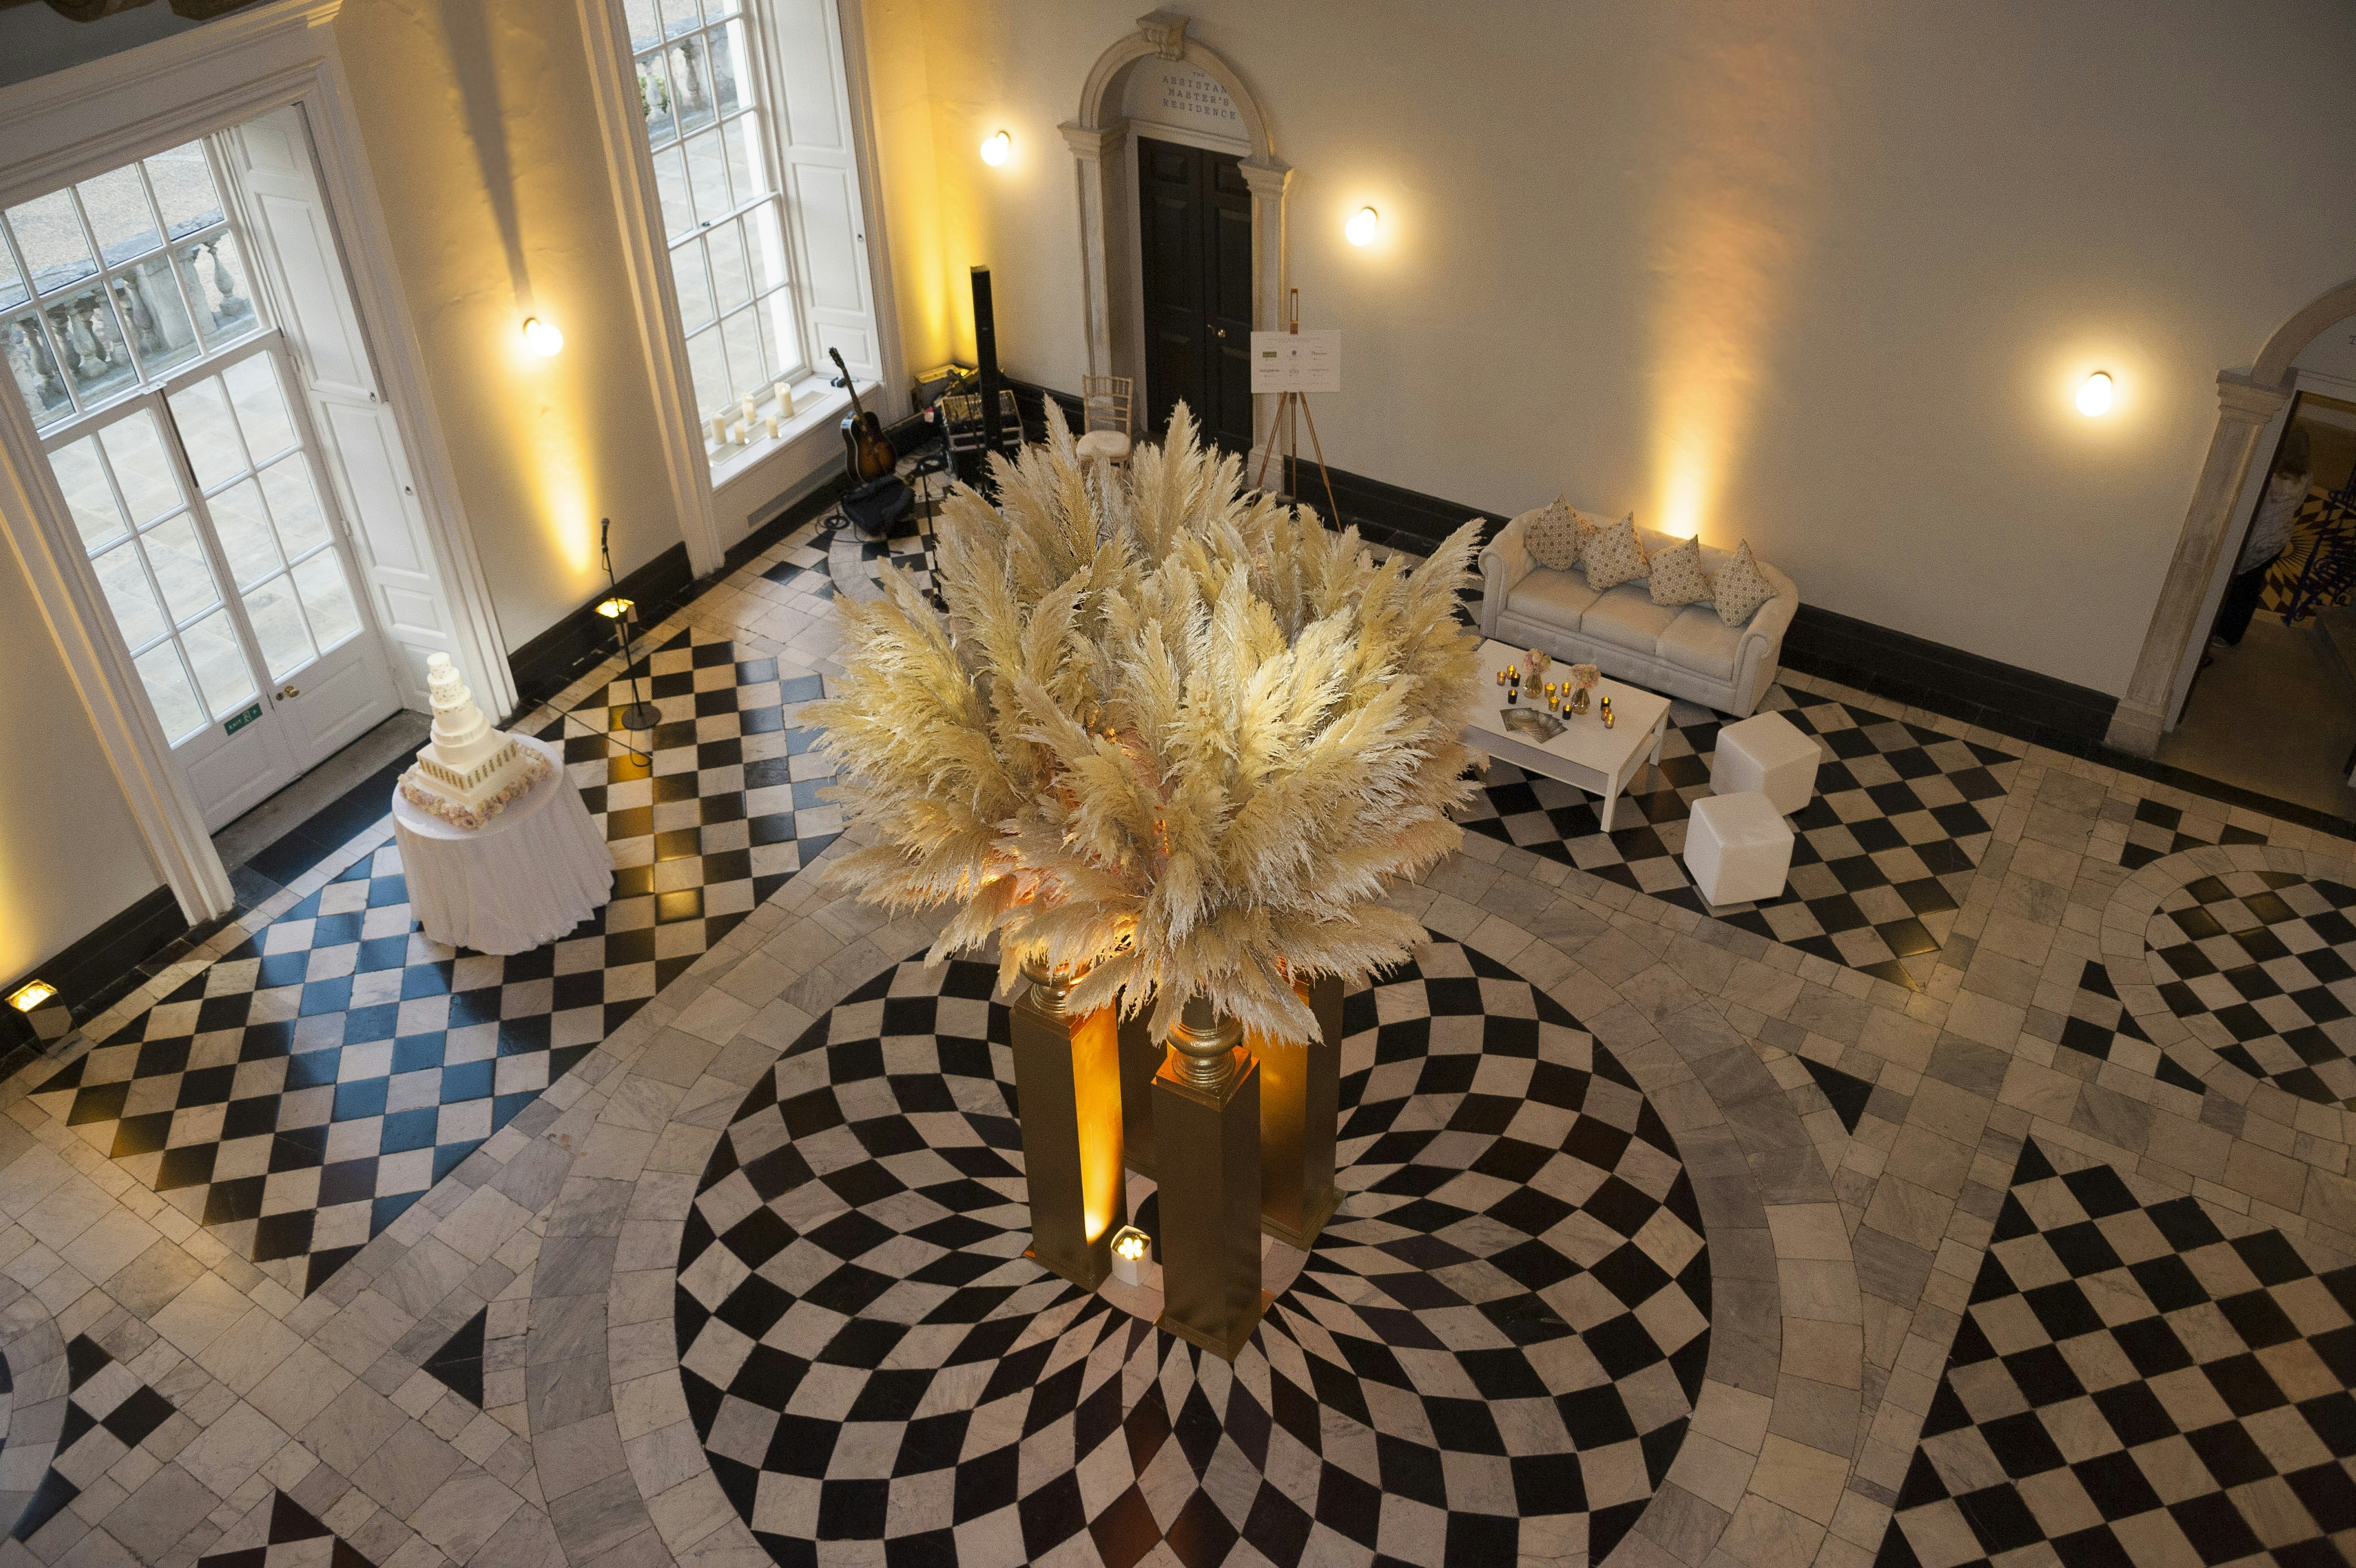 The Queen's House - The Great Hall image 7